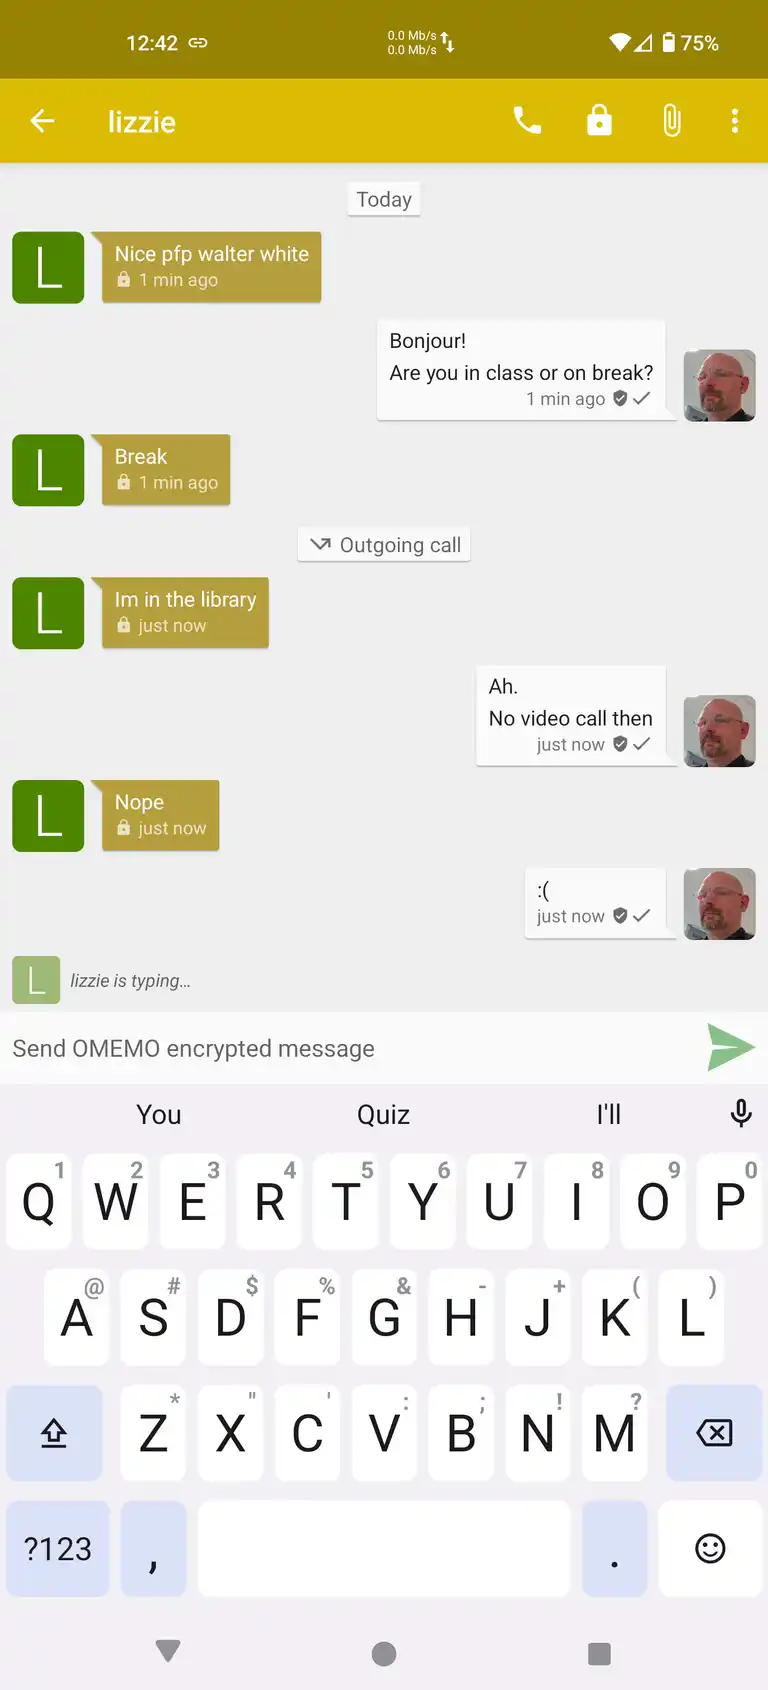 A text chat between two people